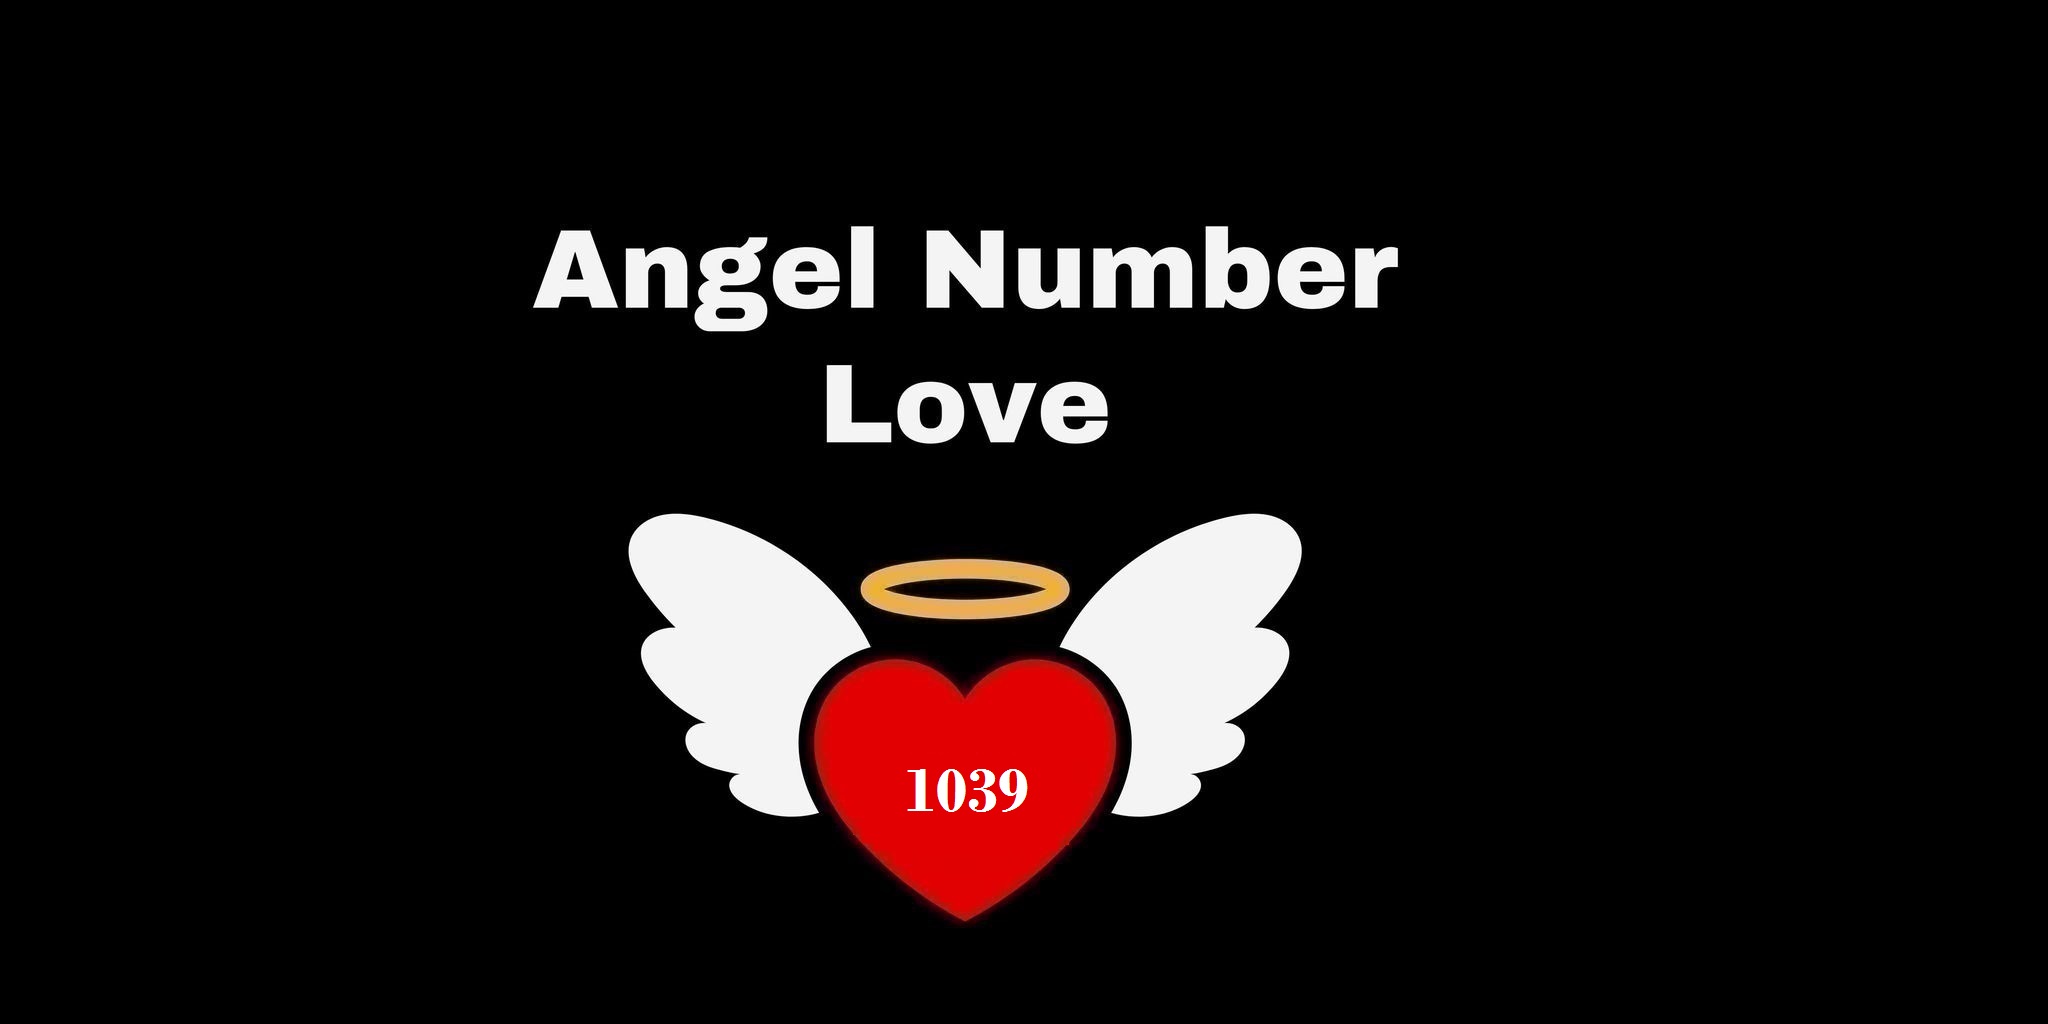 1039 Angel Number Meaning In Love